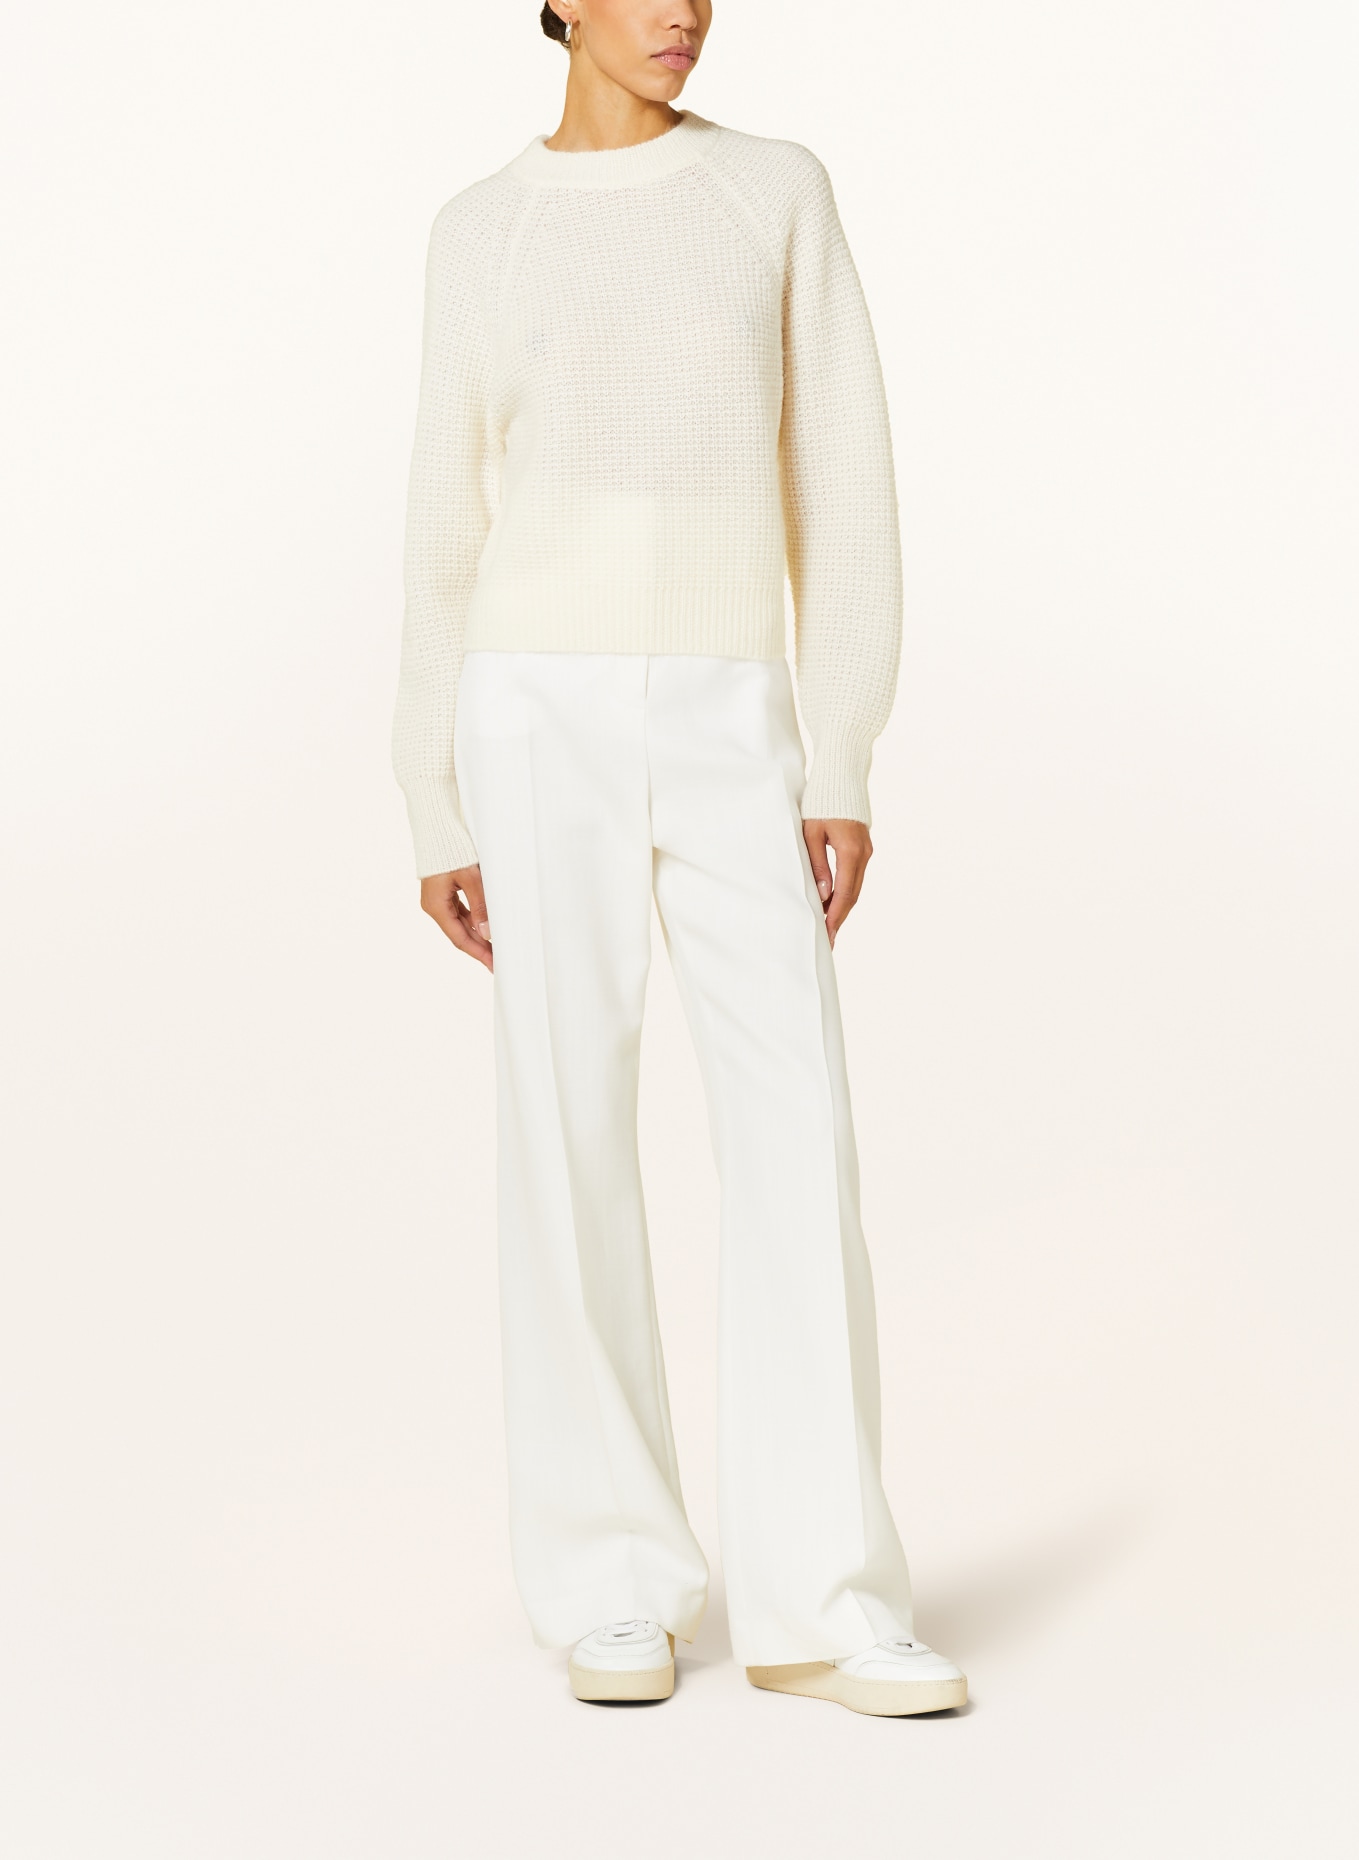 FABIANA FILIPPI Sweater with mohair, Color: WHITE (Image 2)